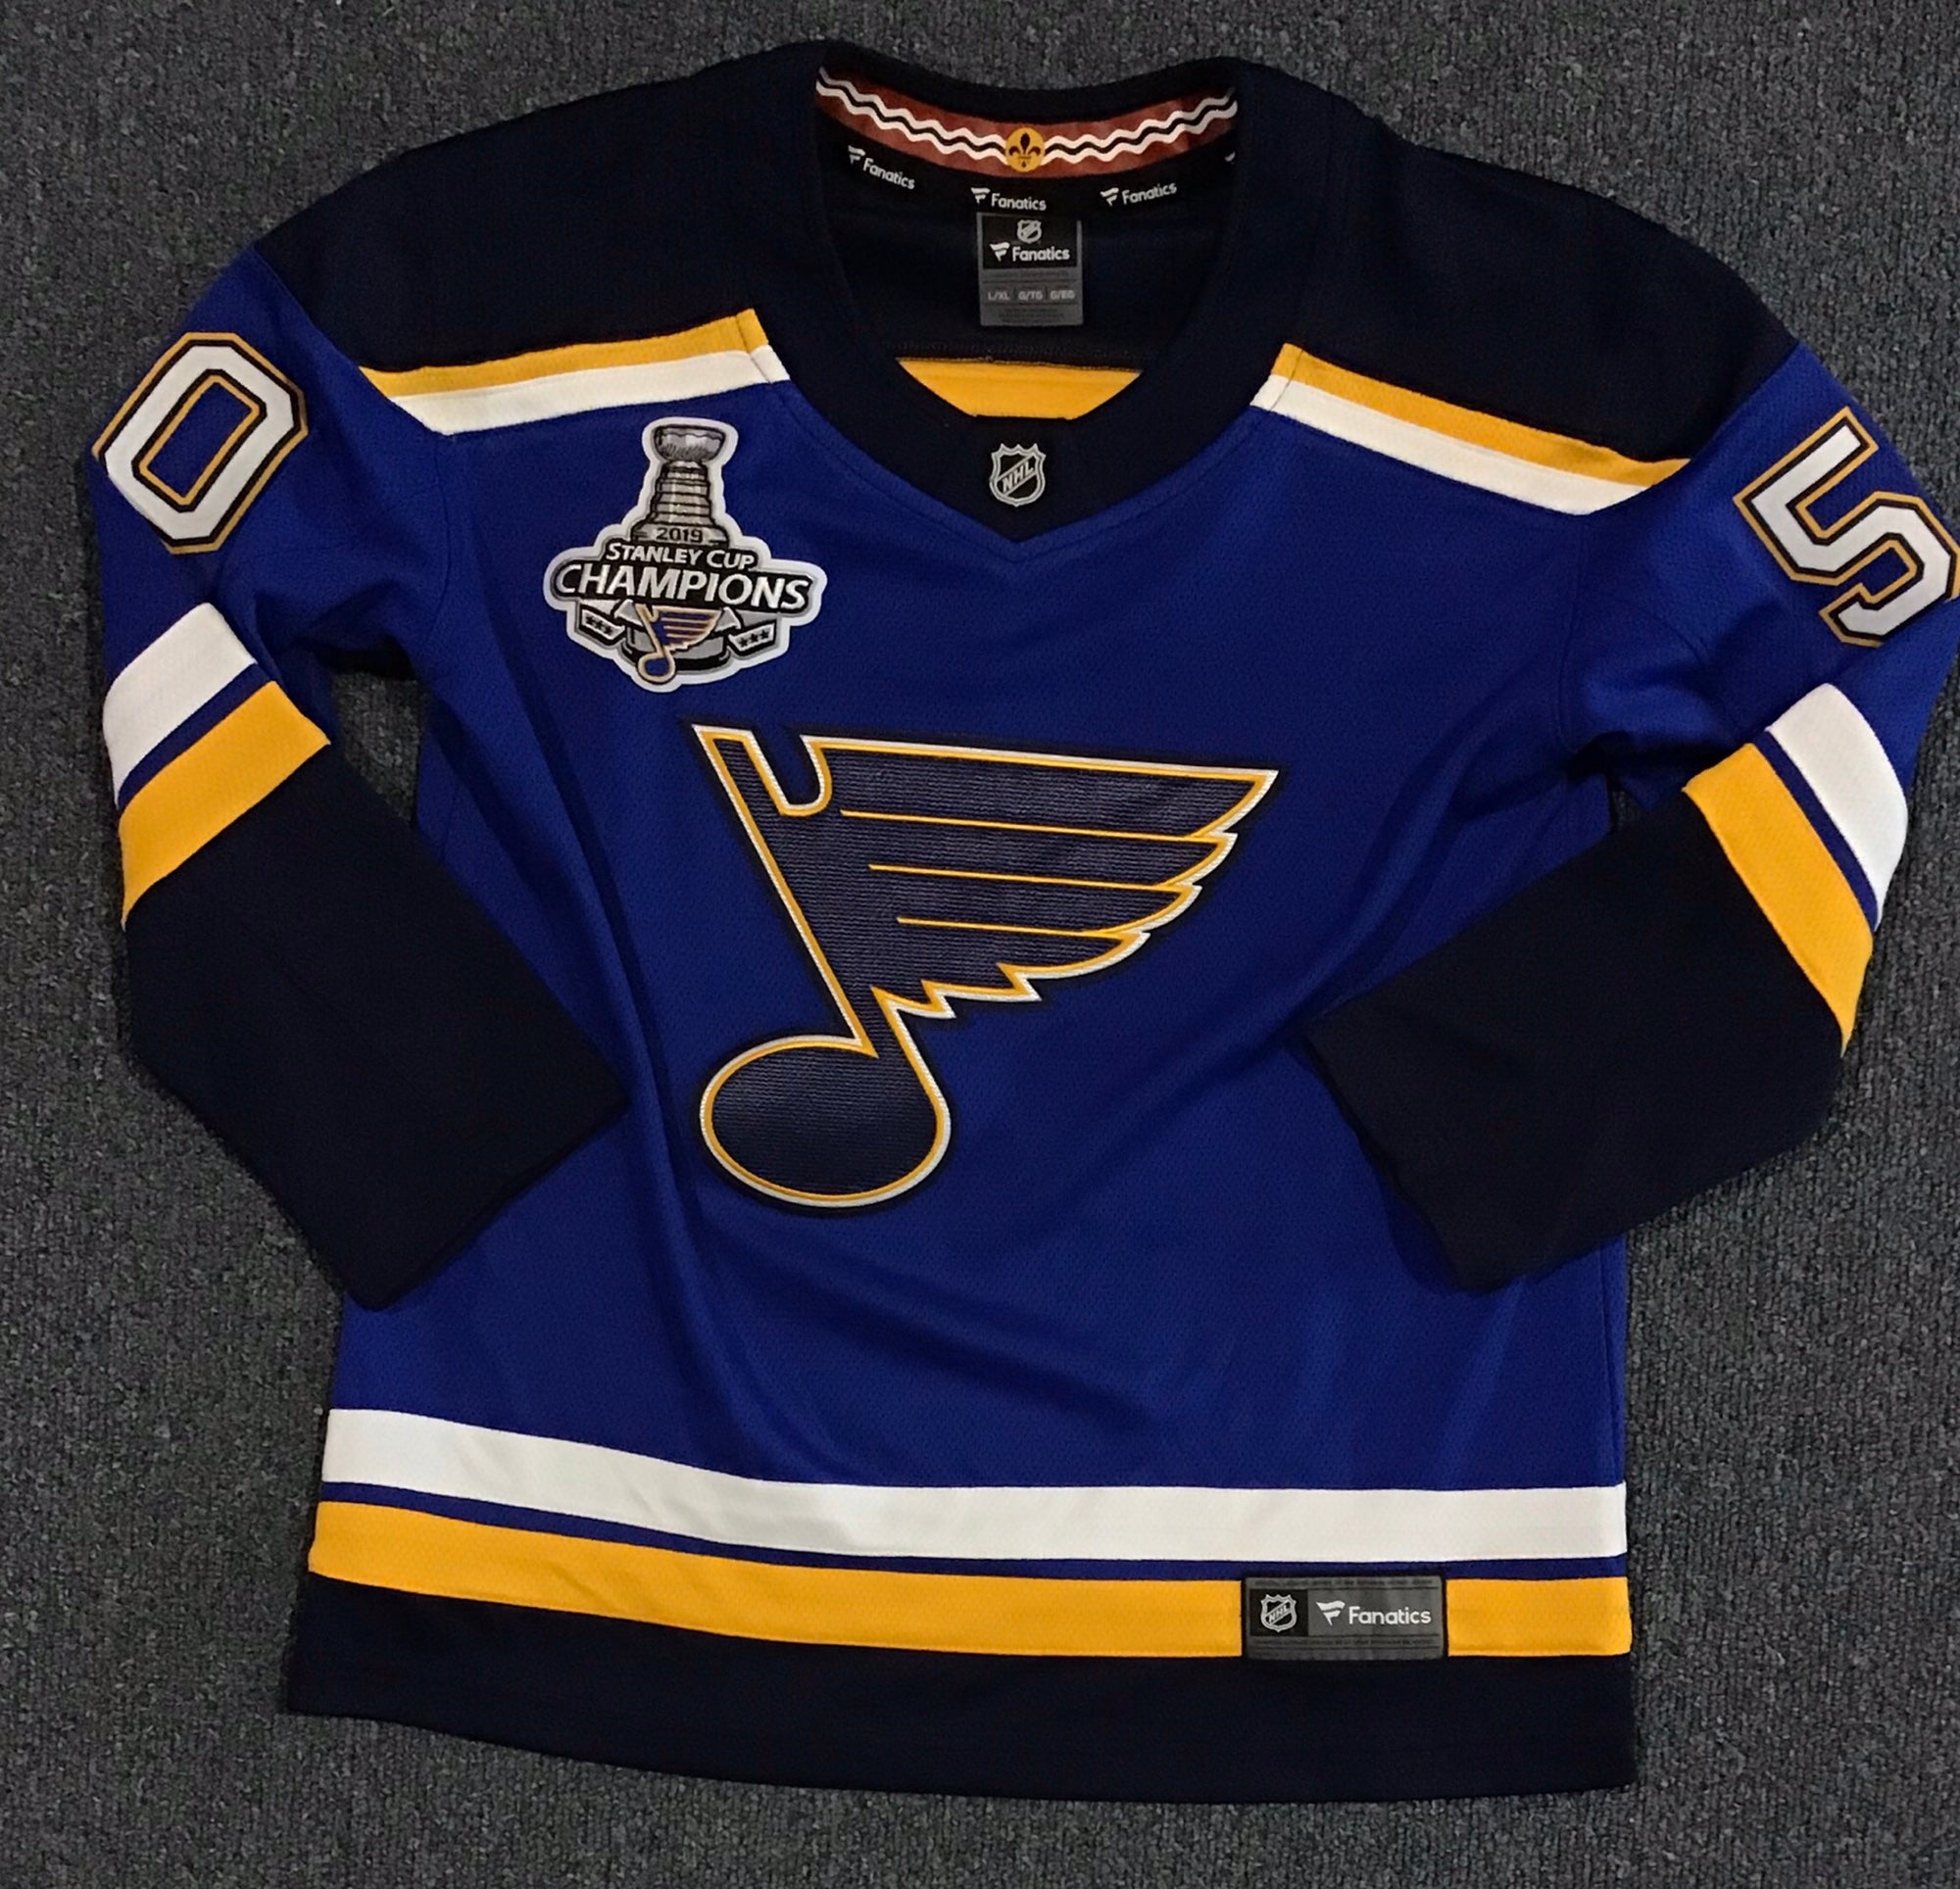 St Louis Blues Large T-shirt - Stanley Cup Champs 2019 - NWT-NHL